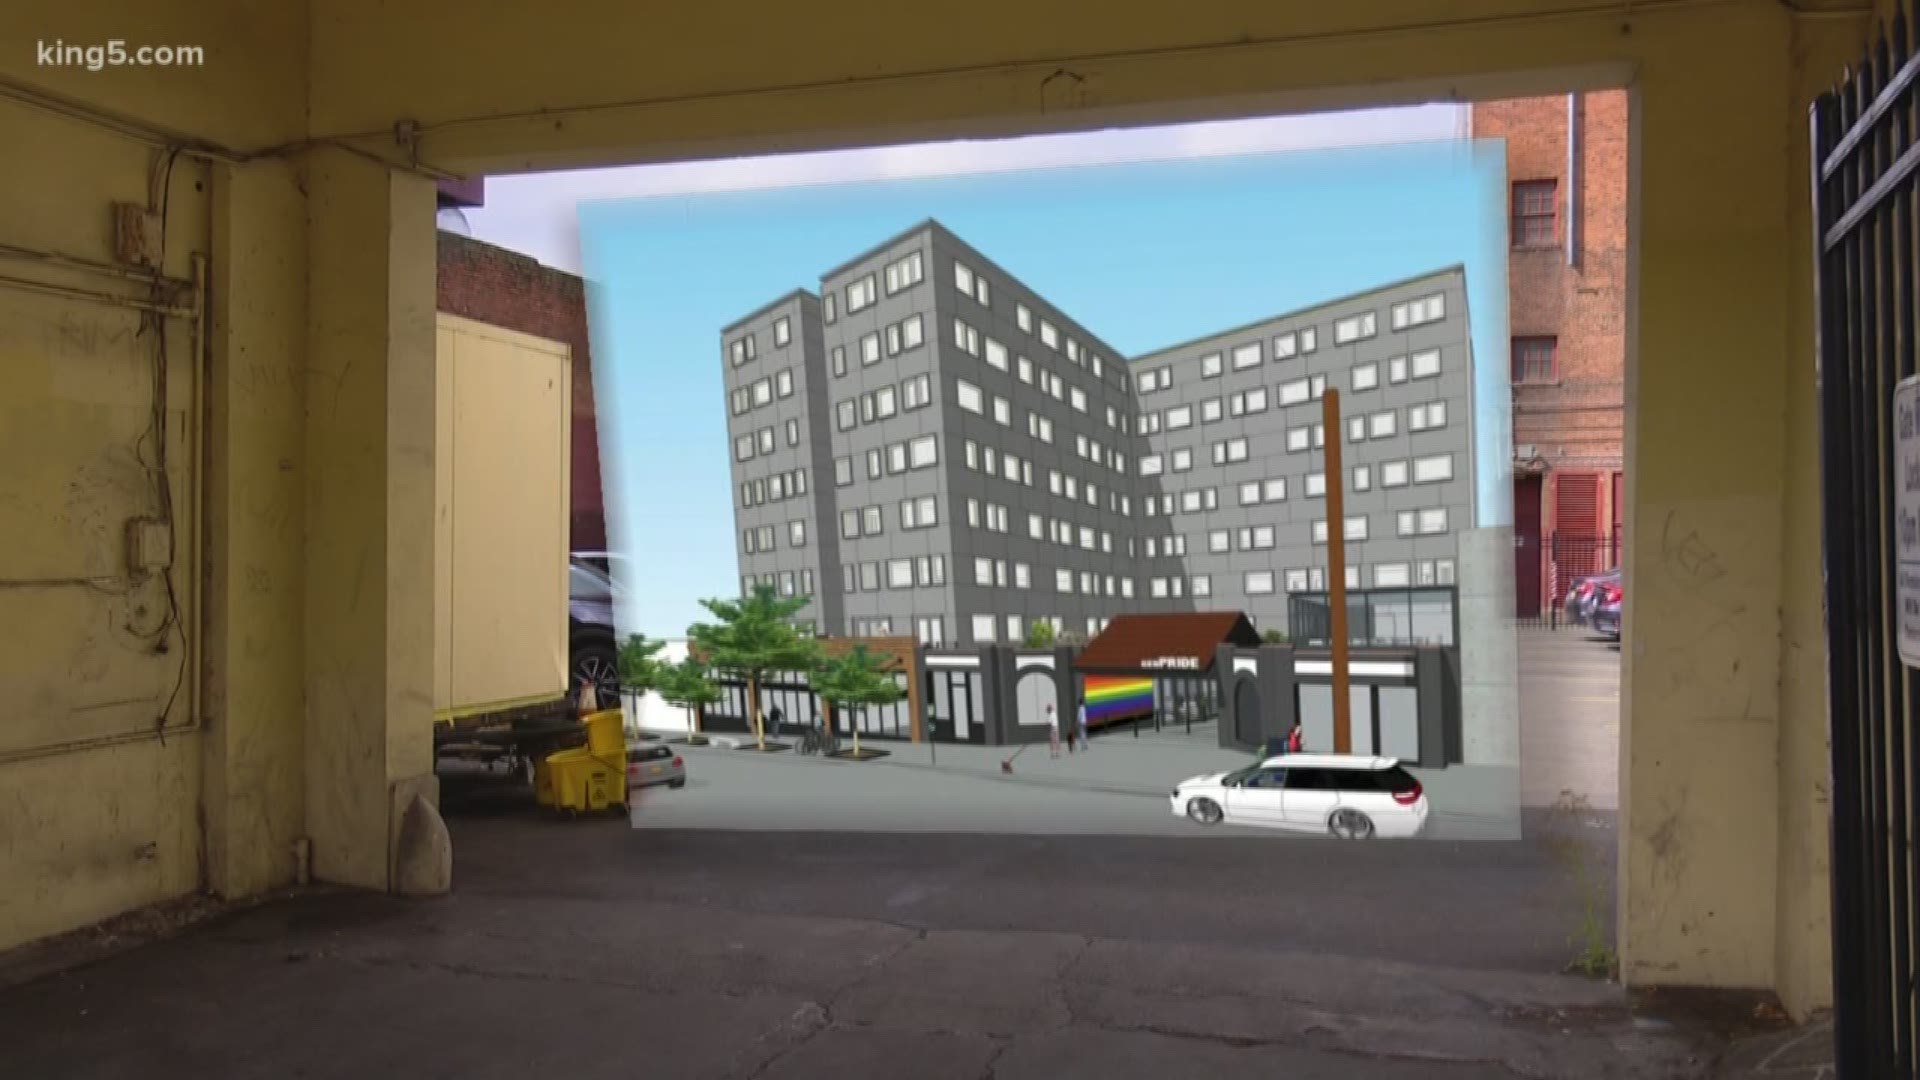 An affordable housing complex for LGBTQ seniors in Seattle's Capitol Hill neighborhood will be a first for Washington state. KING 5's Kalie Greenberg reports.